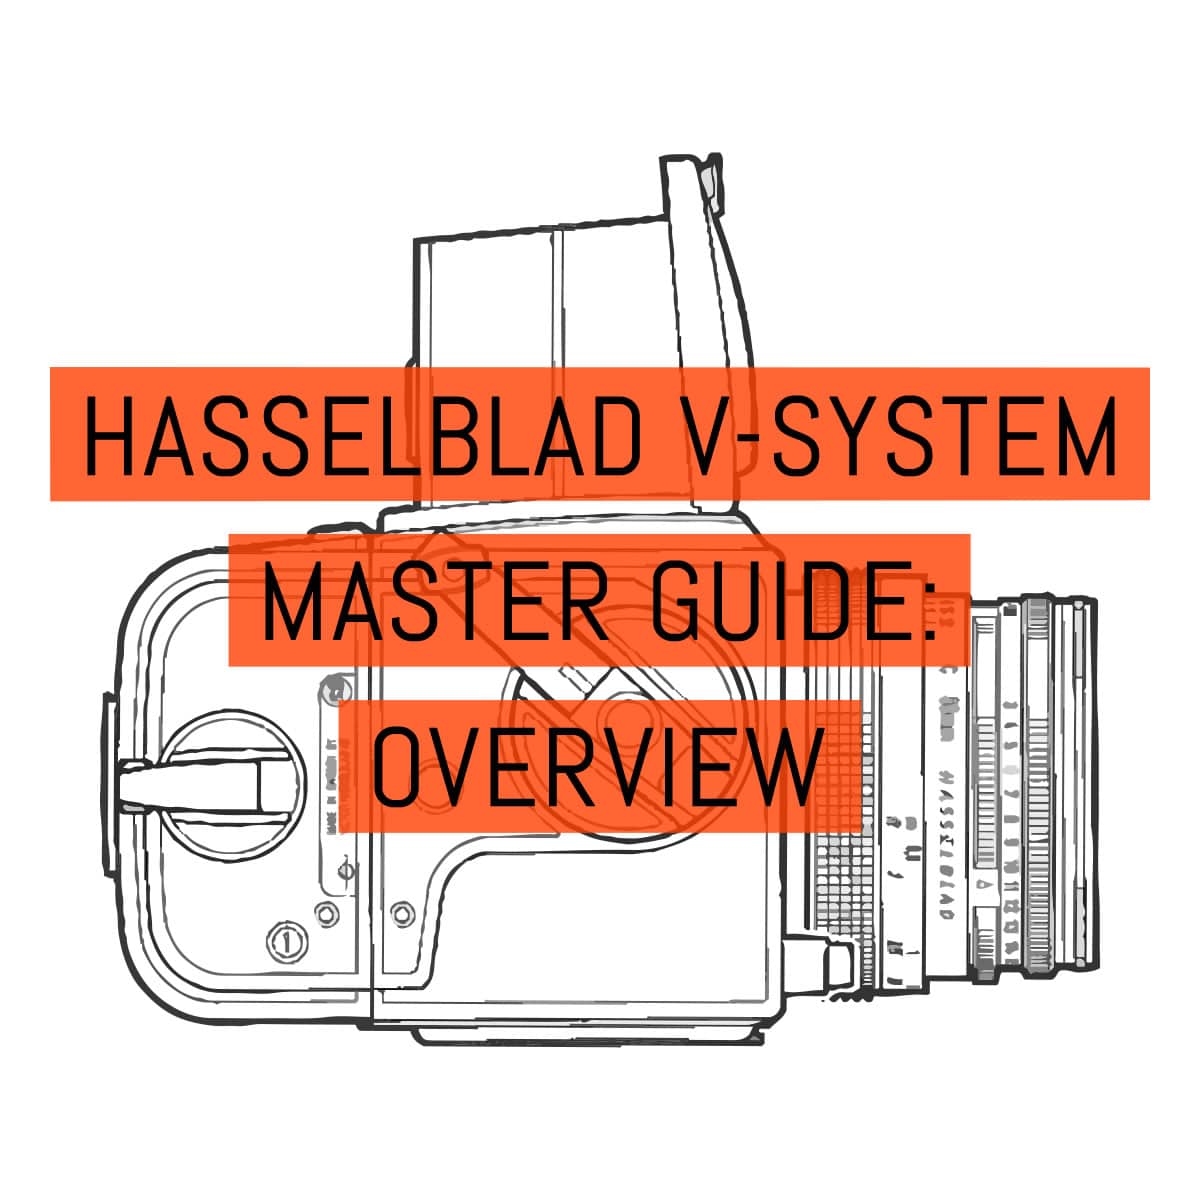 The Hasselblad V-System master guide: Overview